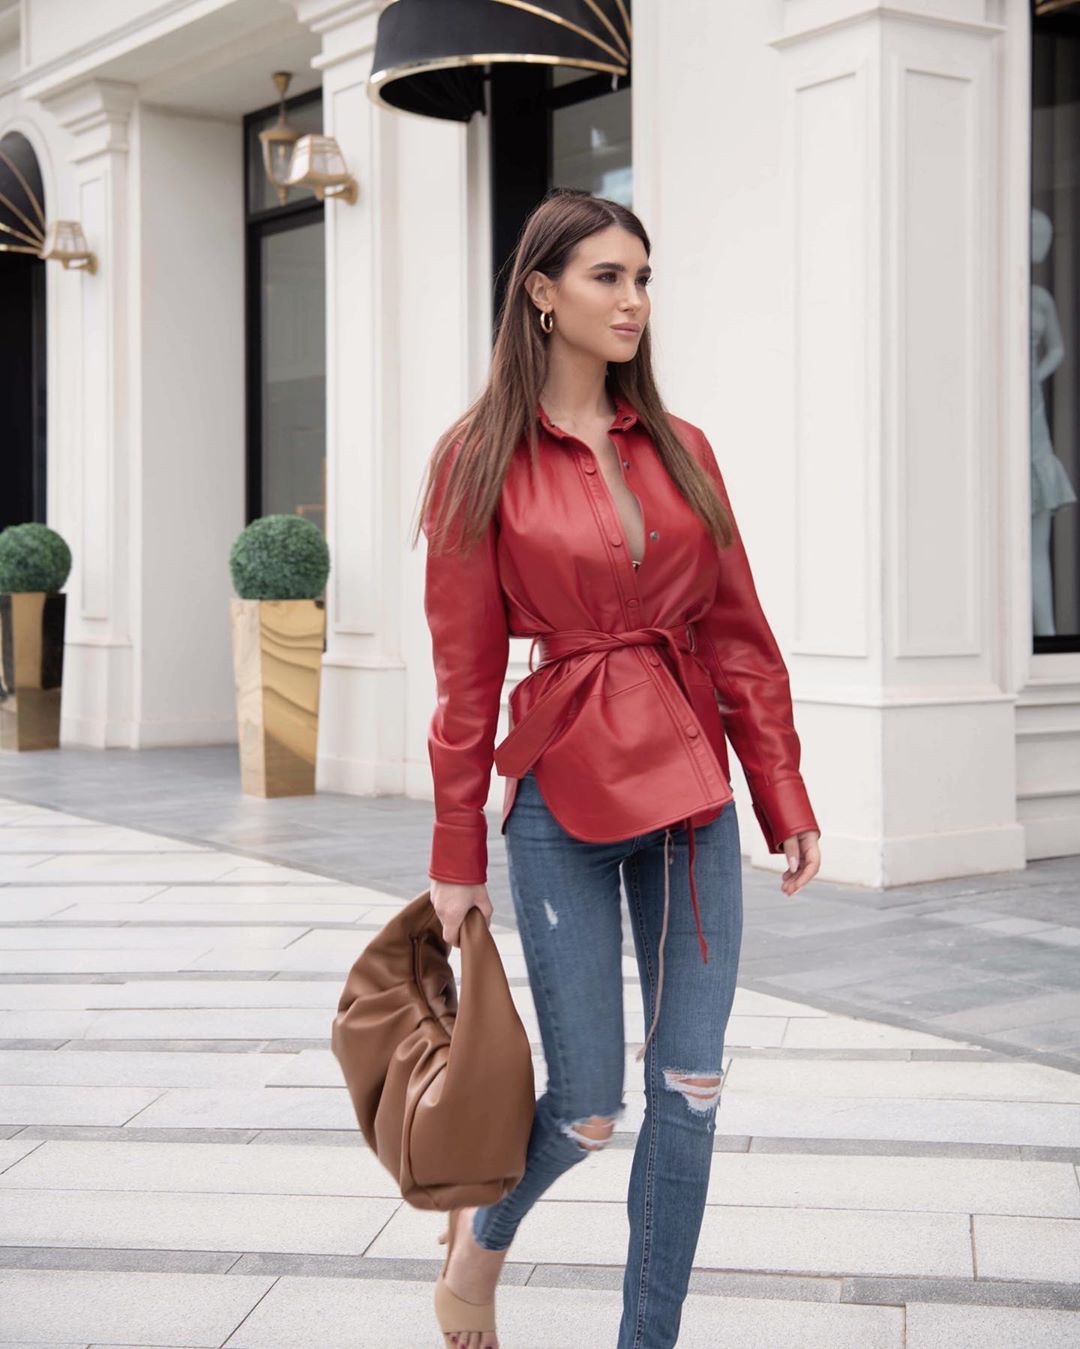 Maroon and brown leather, jeans, wardrobe ideas: Instagram girls,  Maroon And Brown Outfit  